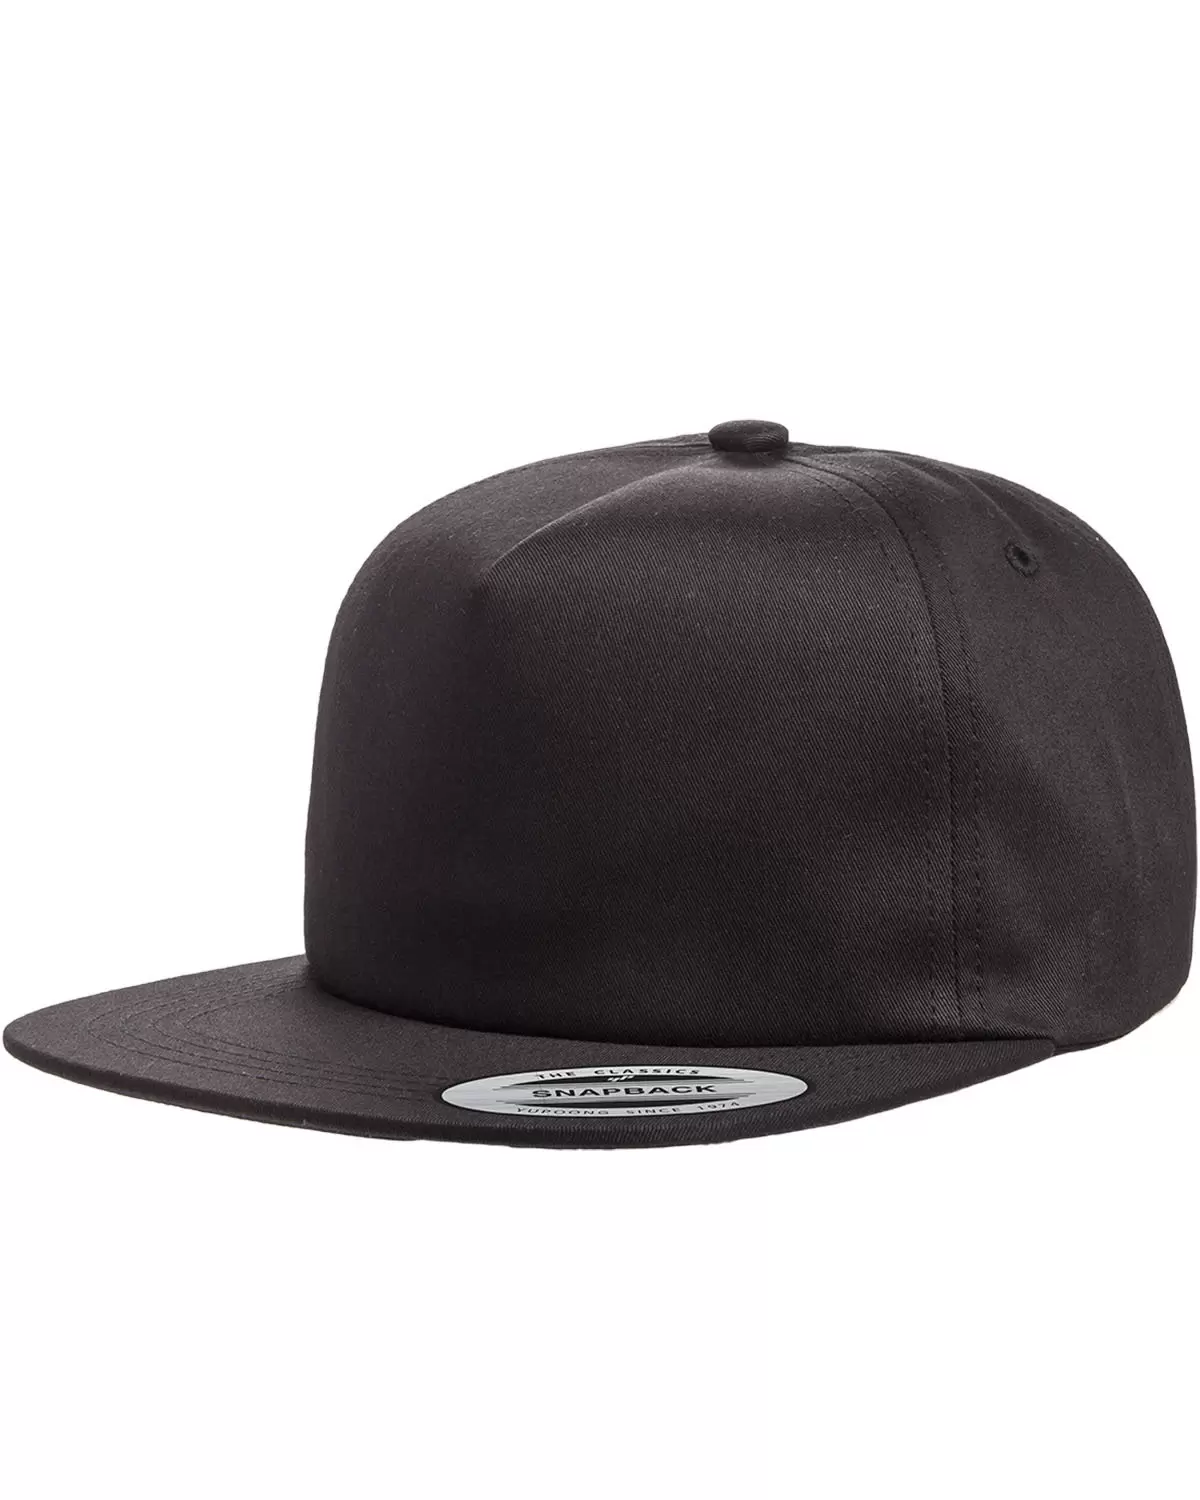 Yupoong-Flex Fit Cap Unstructured From Five-Panel 6502 Snapback 